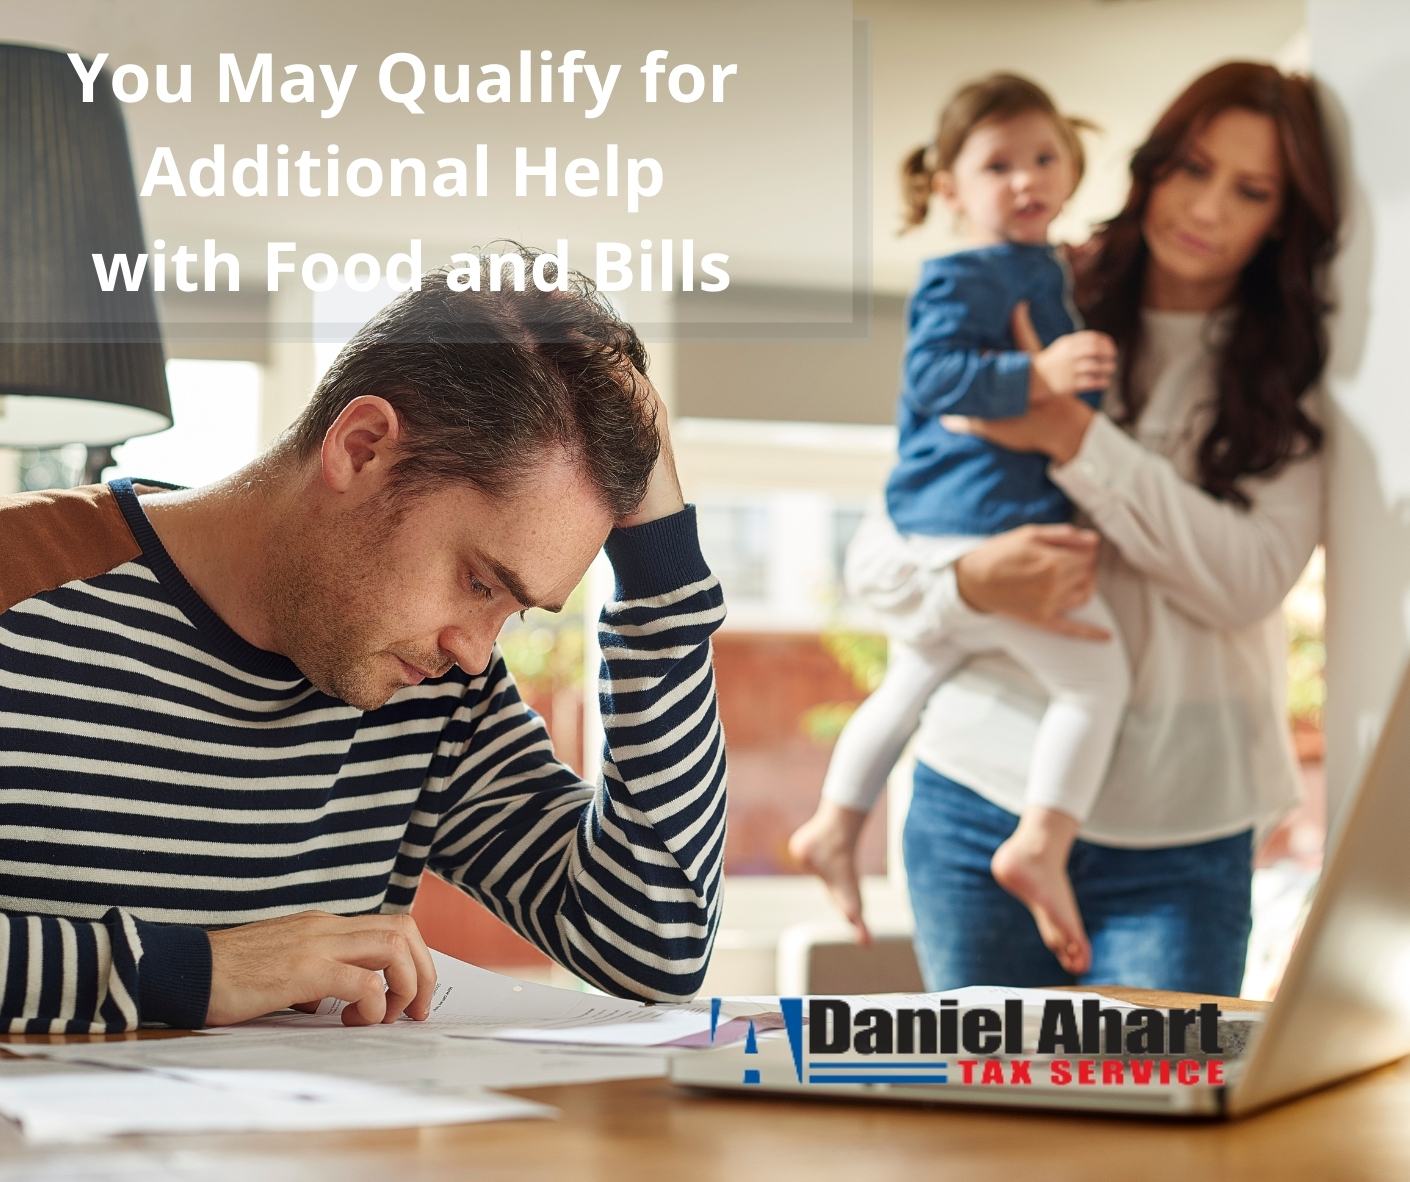 You May Qualify for Additional Help with Food and Bills